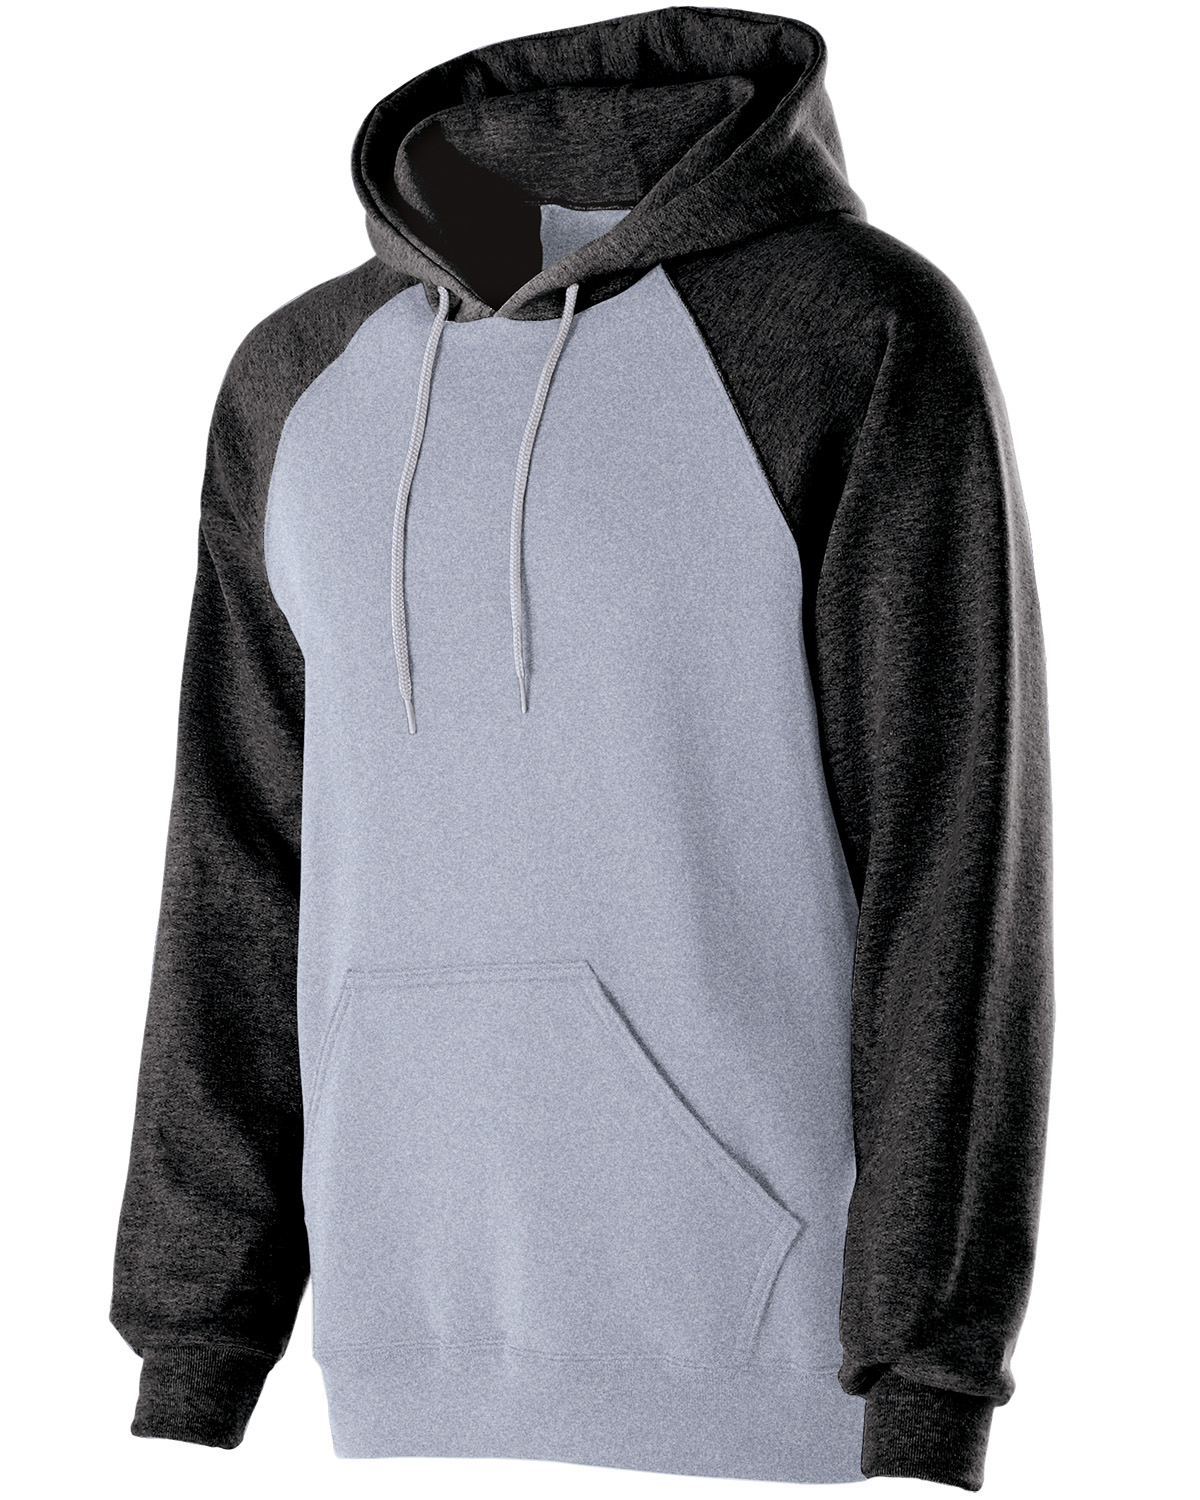 Holloway 229179 - Adult Cotton/Poly Fleece Banner Hoodie